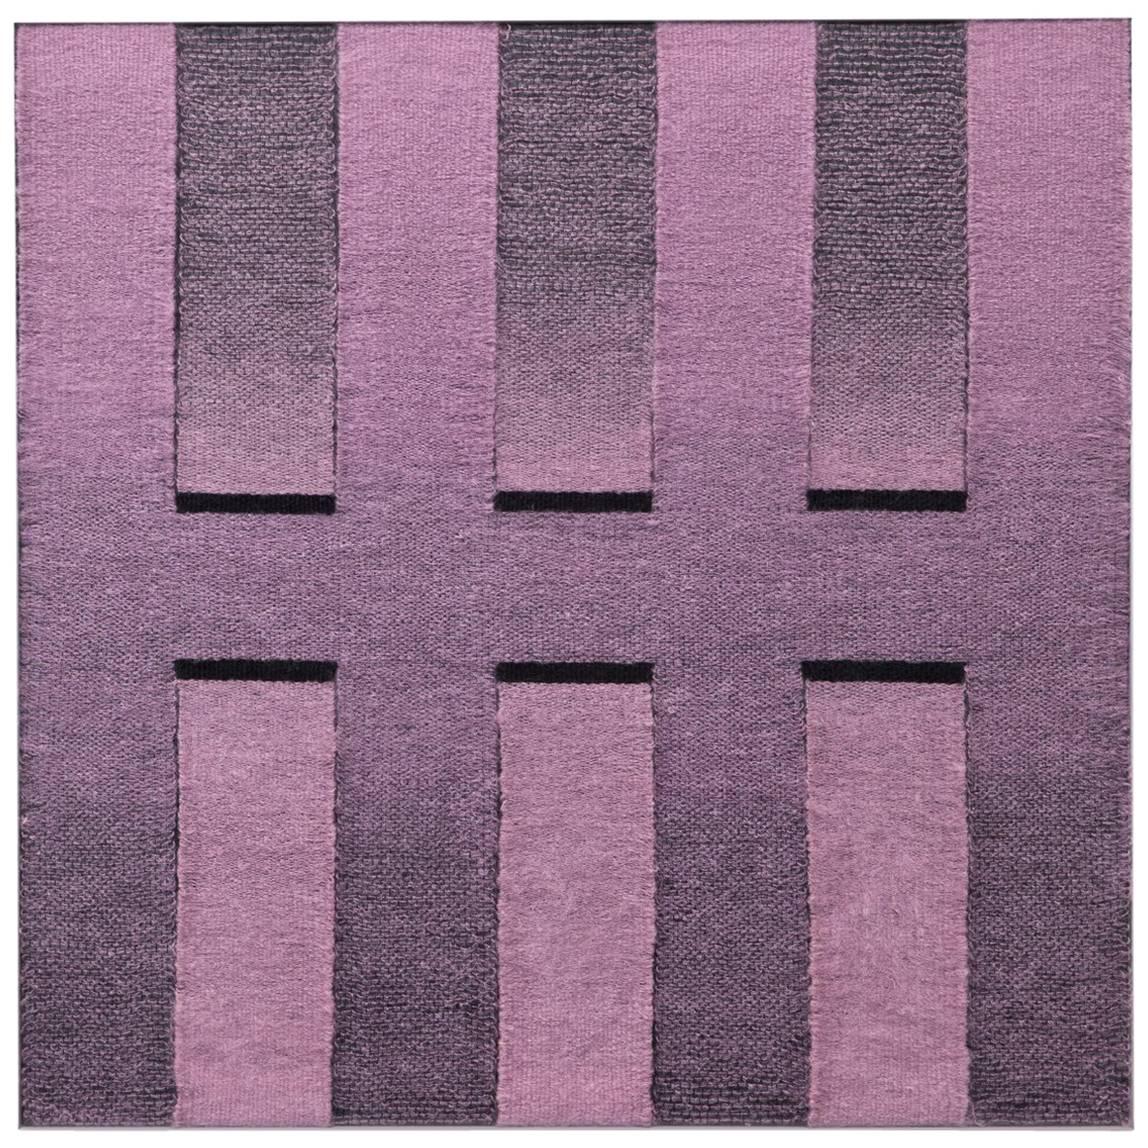 Contemporary Weaving Textile Fiber Art, Pink to Black Rectangles by Mimi Jung For Sale